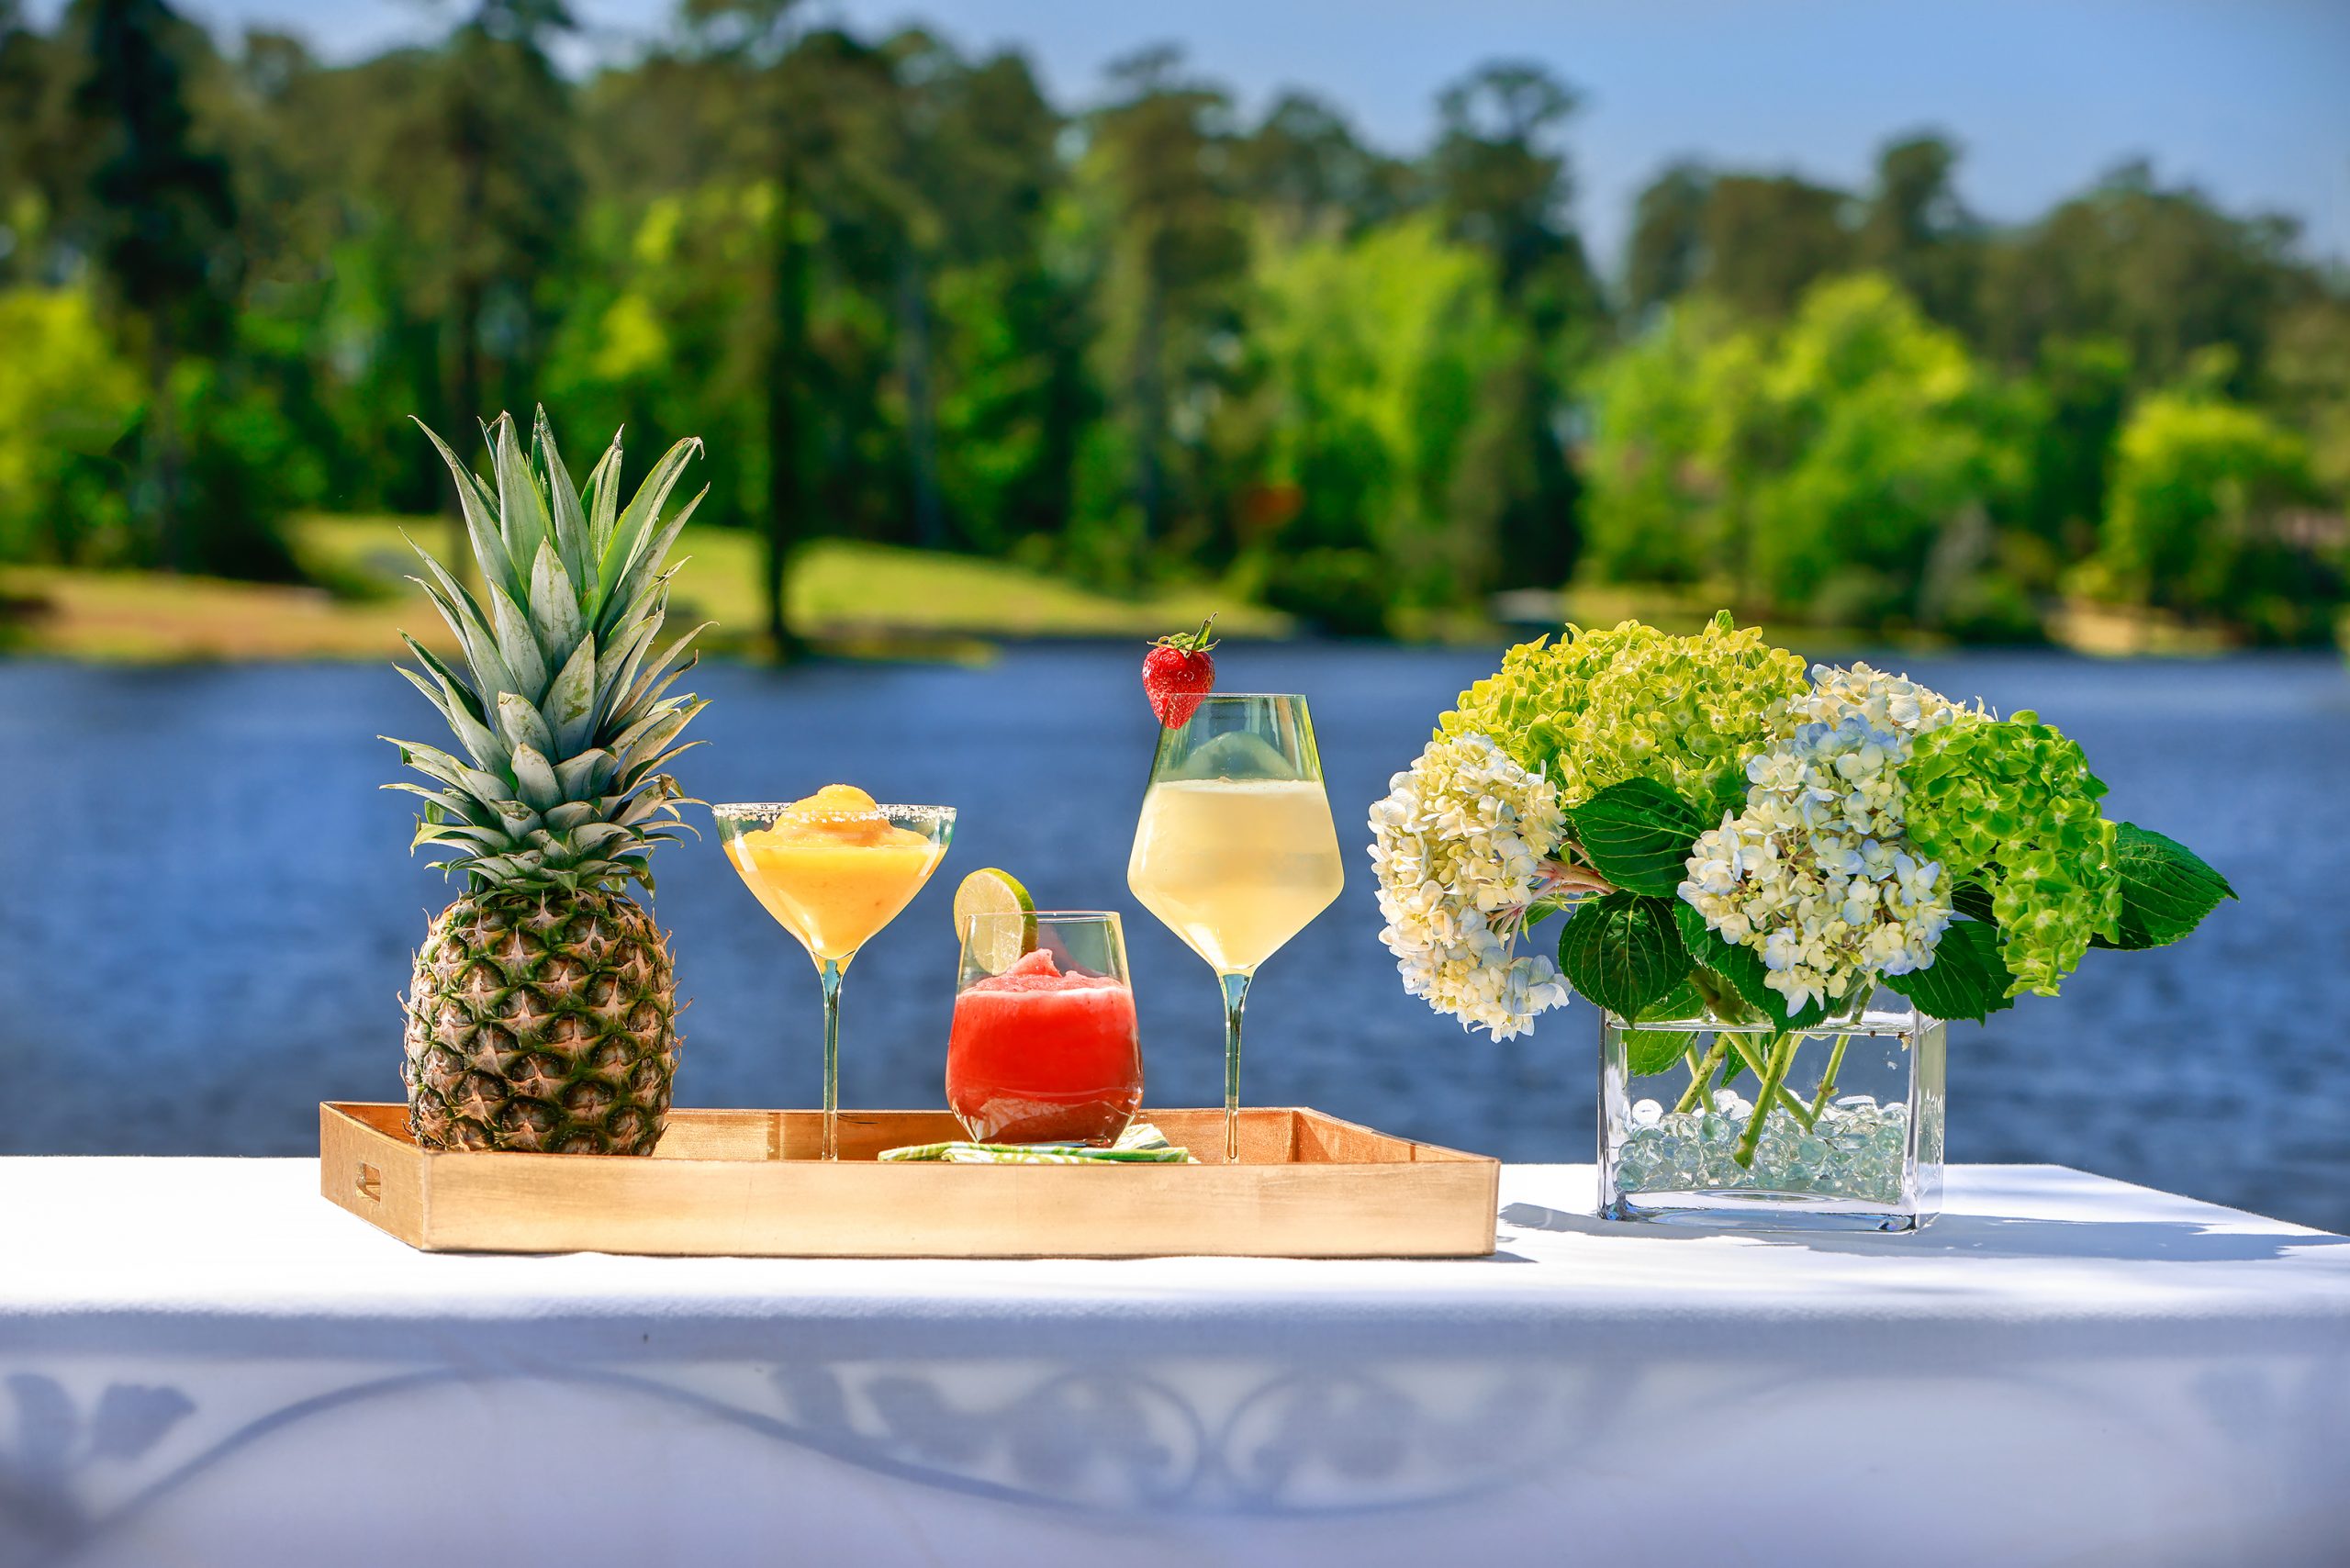 Surrender from the heat, lakeside, to a Martinez Mango Marguerita, Papa’s Deliciously Decadent Frozen Daiquiri, or the Poplawski Piña Colada. A variety of Estelle glasses and Creative Co-op napkins, courtesy of Kudzu Bakery & Market.
